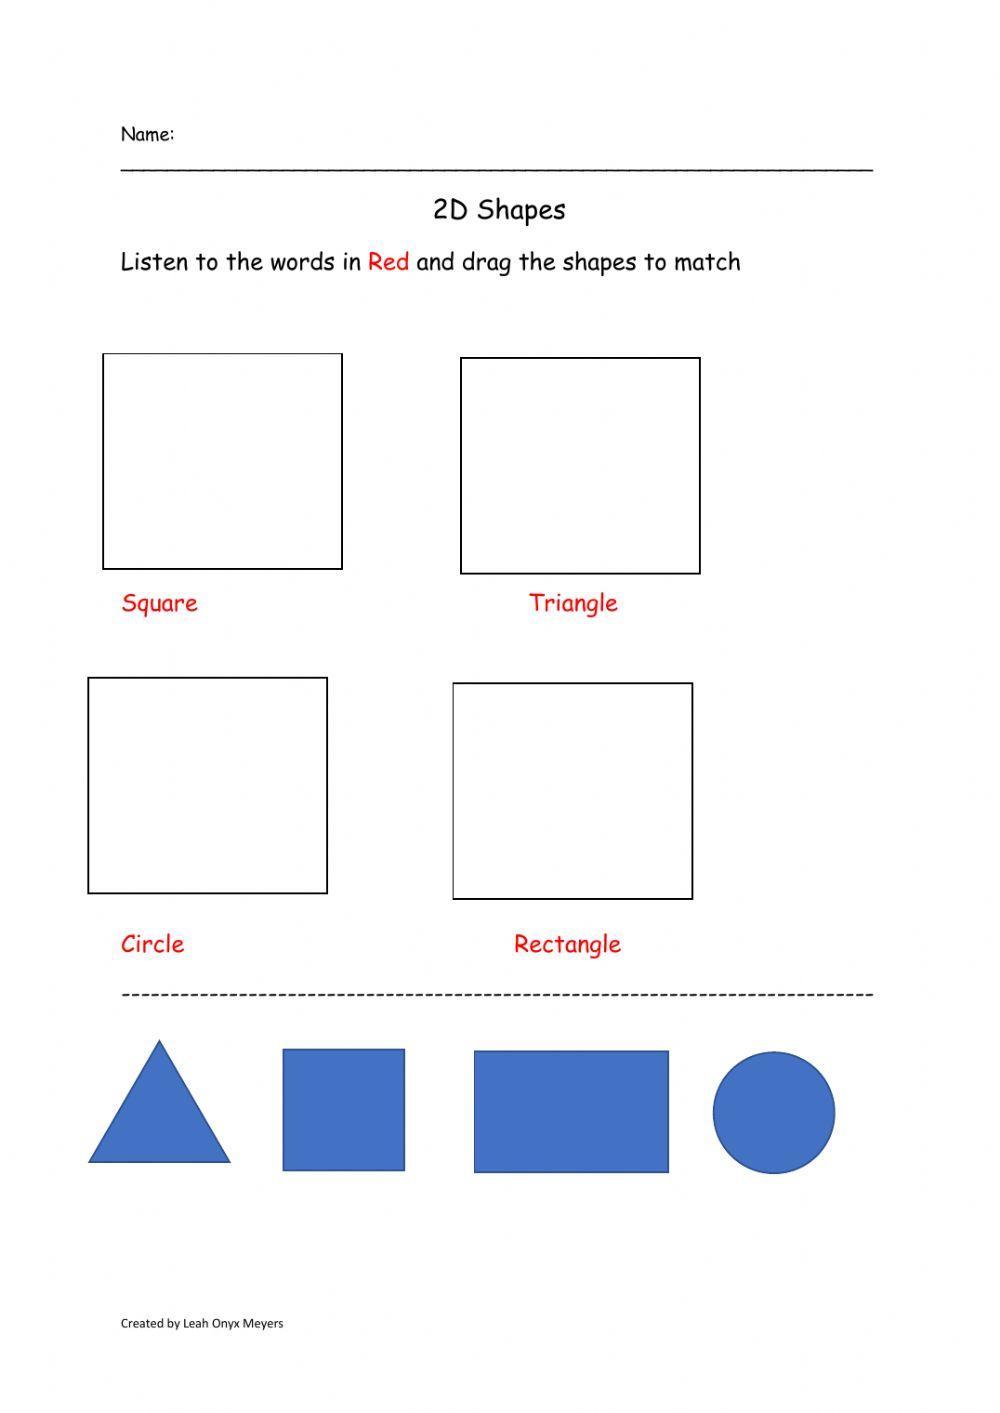 Find the shapes! Circle, Rectangle, Square, Triangle, evaluation